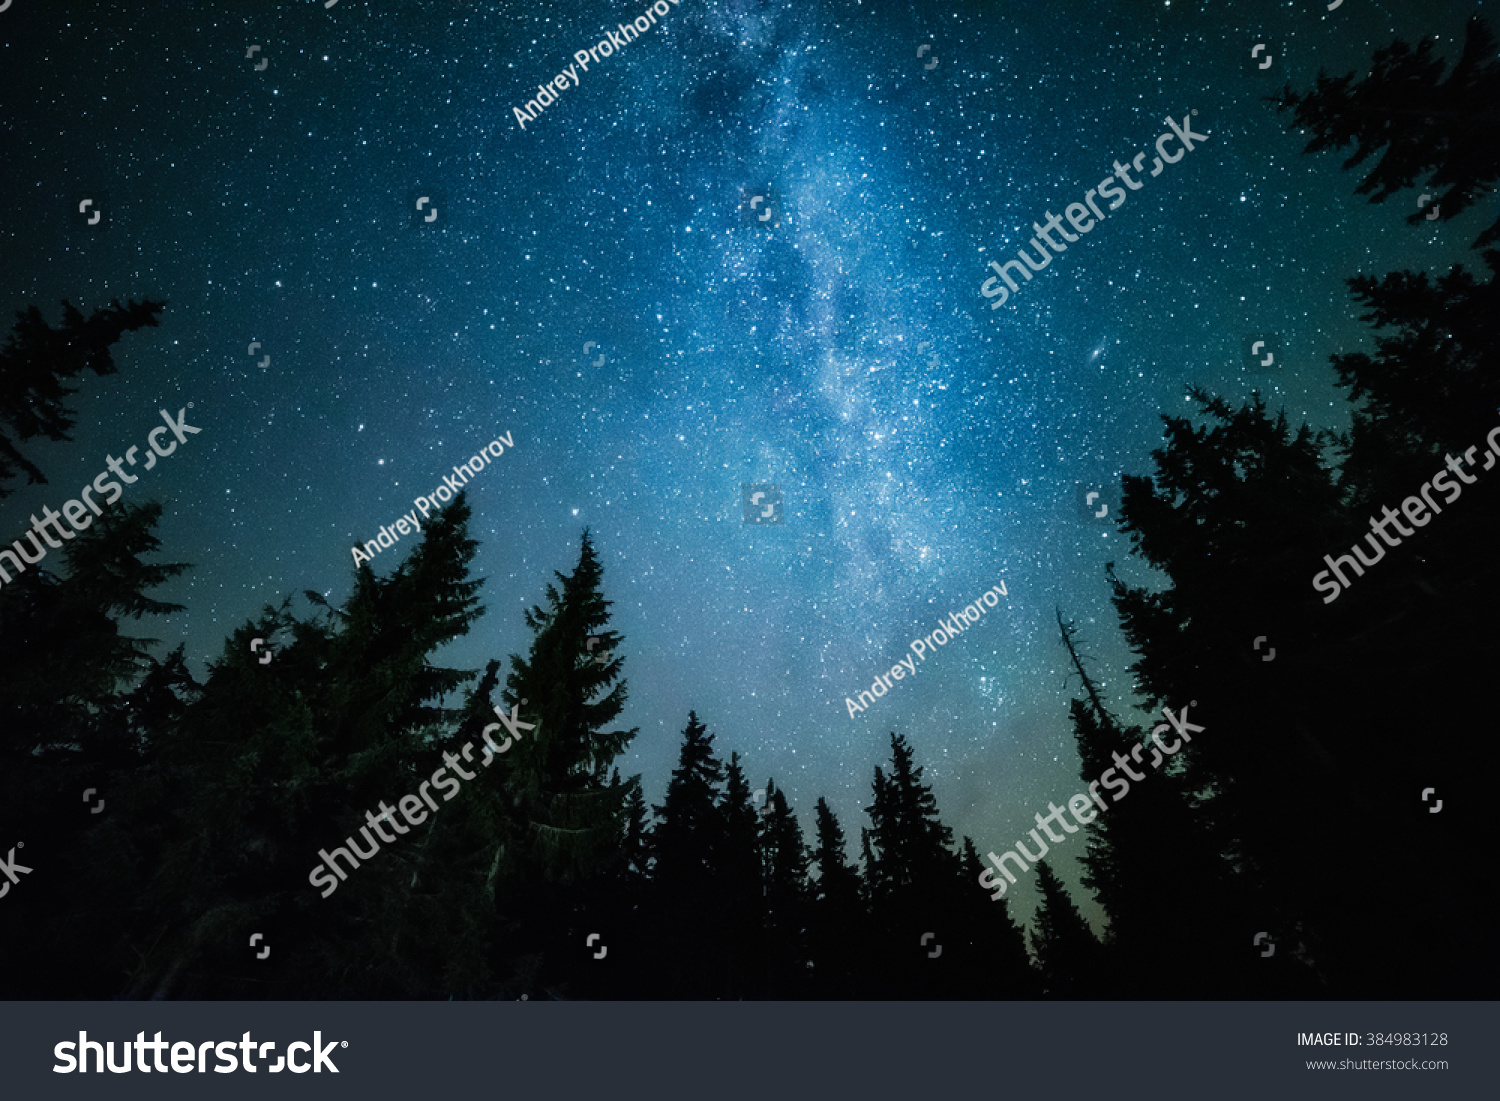 The Milky Way rises over the pine trees on a foreground #384983128